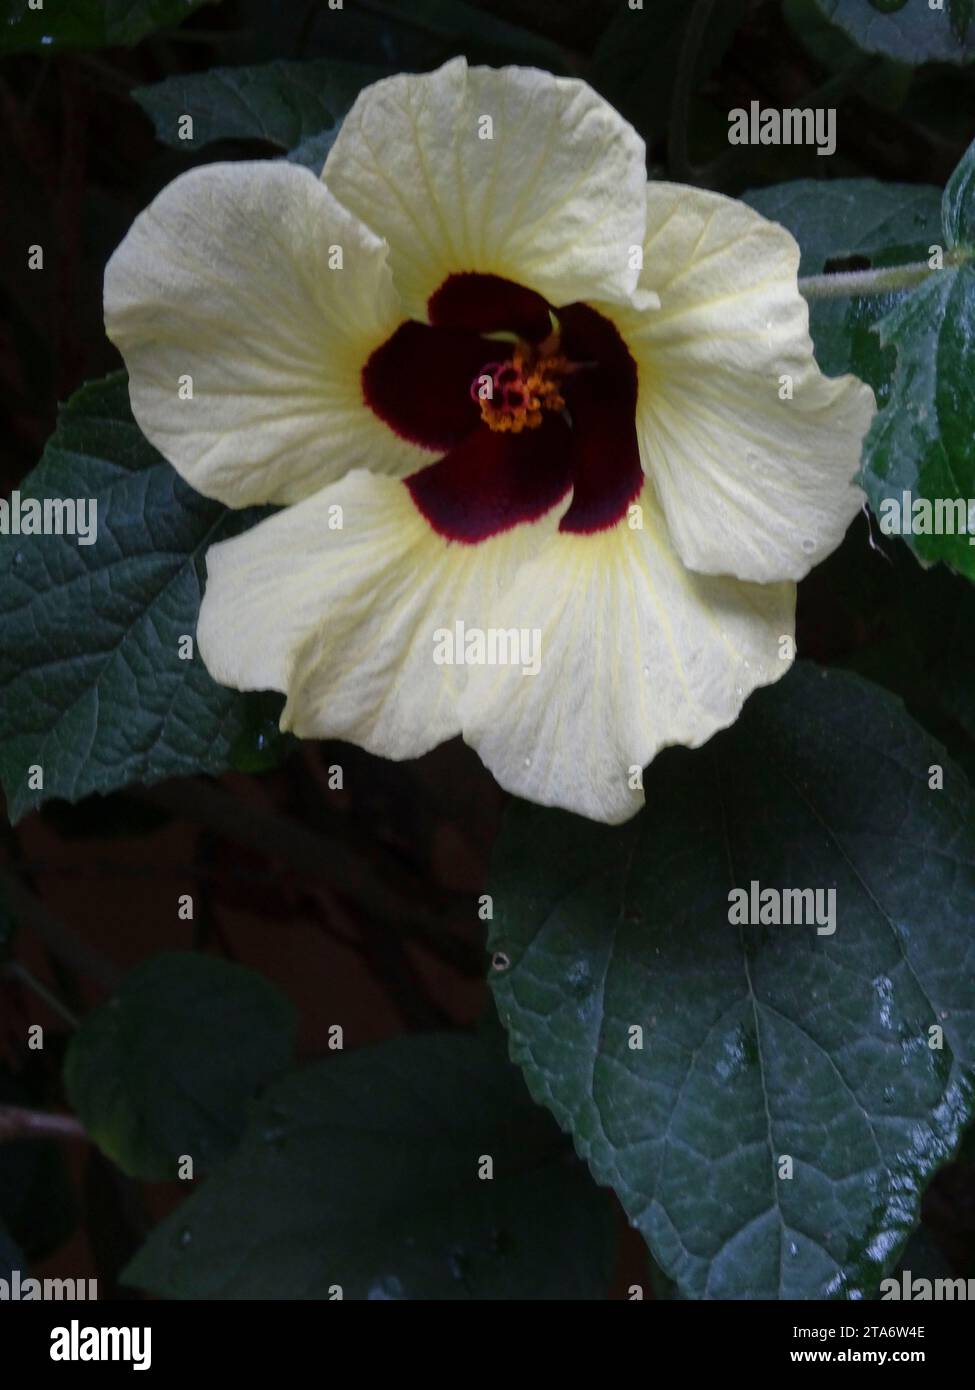 Natural close up flowering plant portrait of single high resolution Hibiscus calyphyllus bloom with foliage as negative space Stock Photo